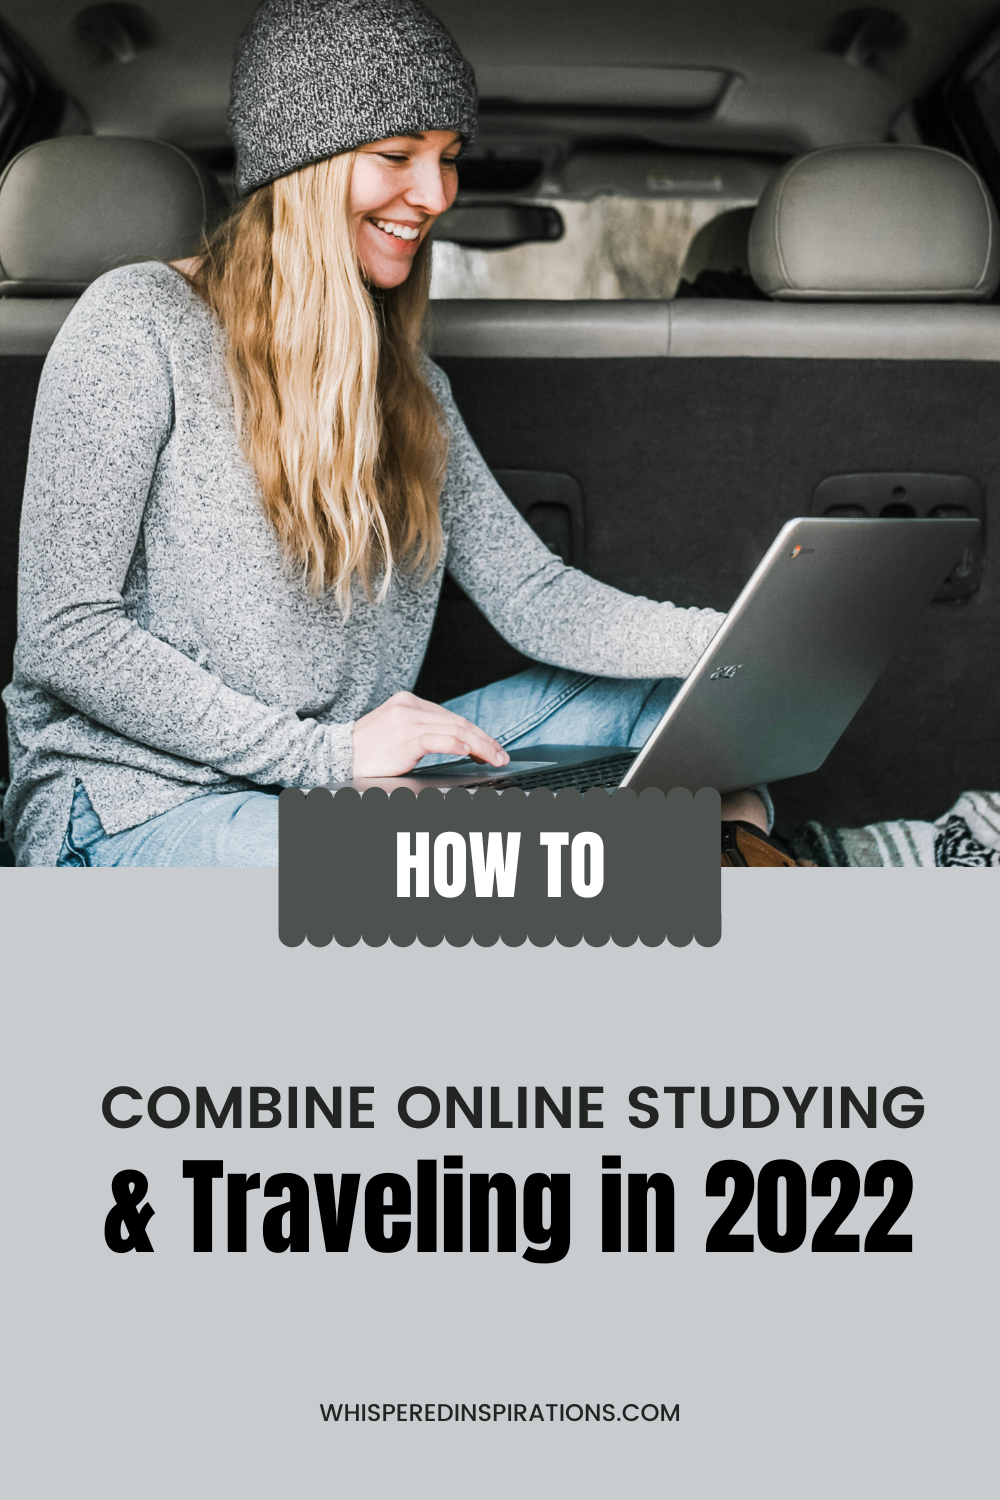 The pandemic has changed everything. Especially education. If you're looking to combine online studying and traveling, read these tips!